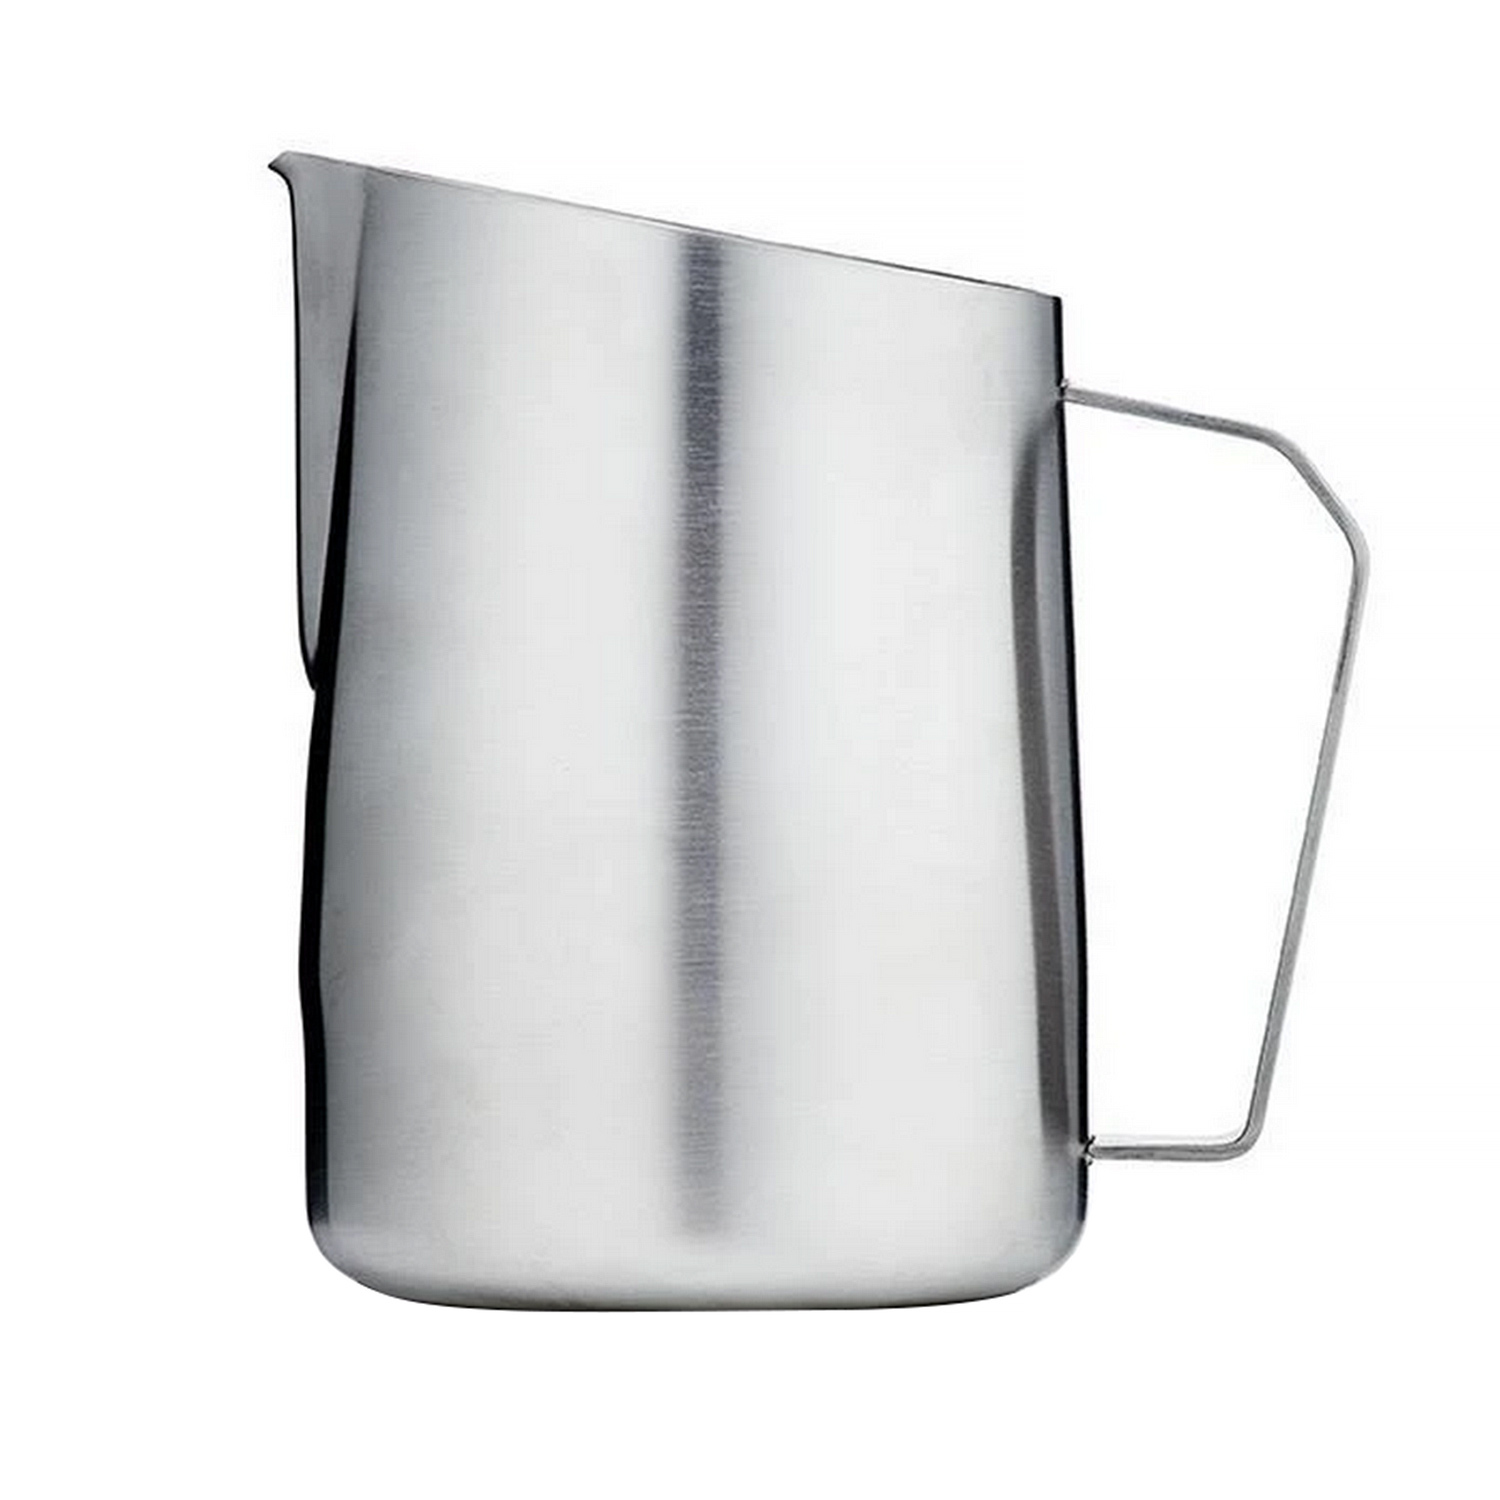 1pc Milk Frothing Pitcher, Stainless Steel Steaming Pitcher, Milk